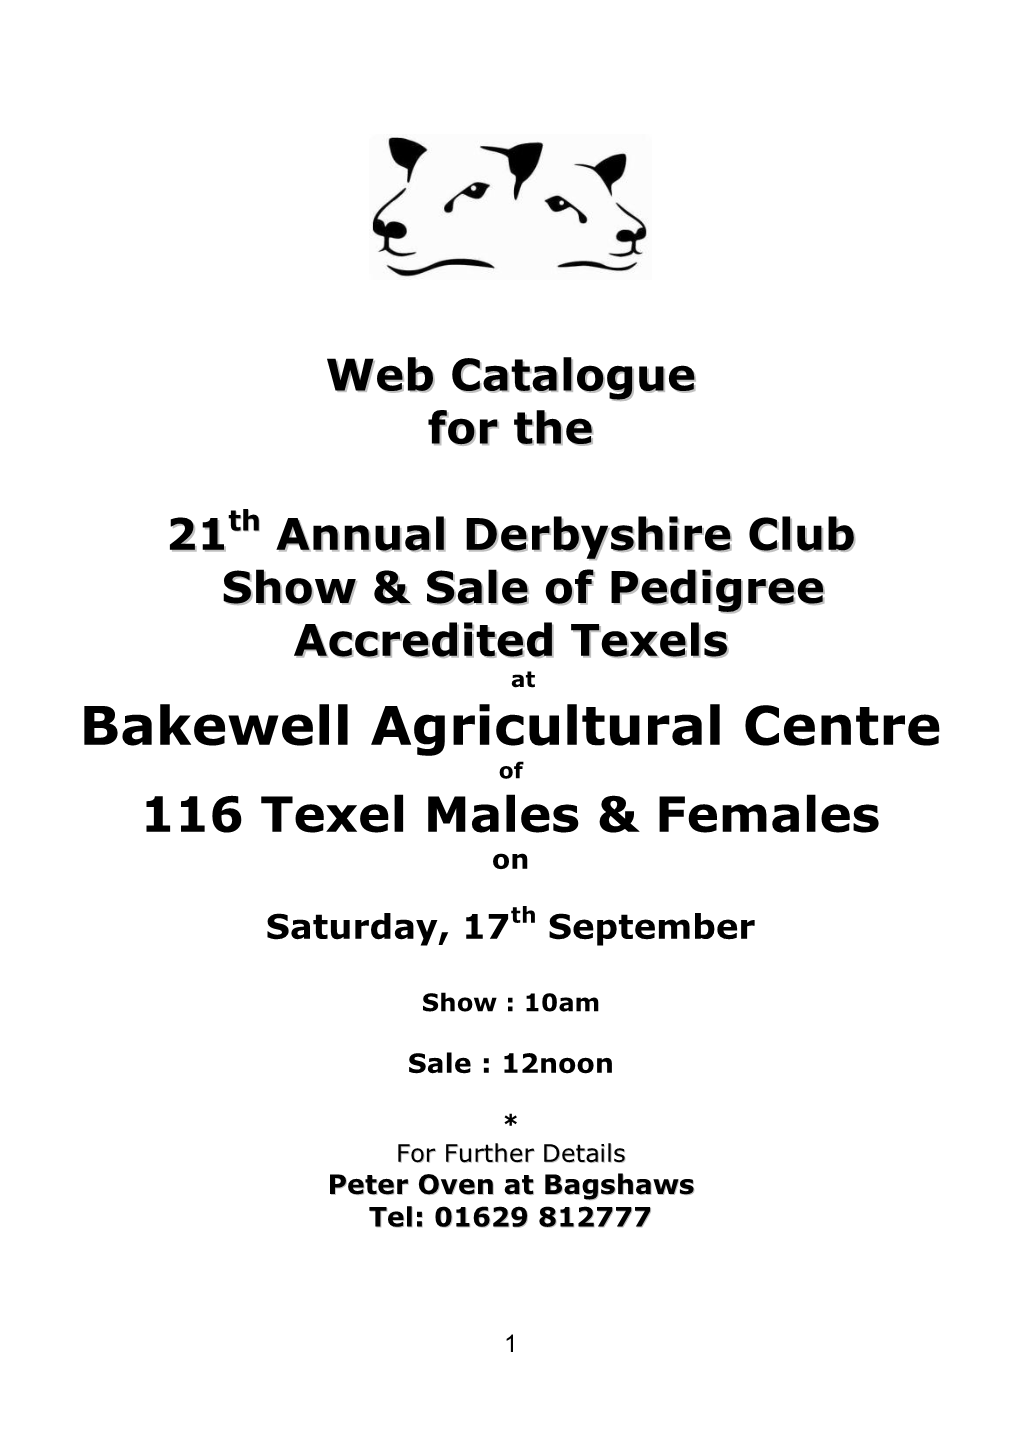 Bakewell Agricultural Centre of 116 Texel Males & Females On